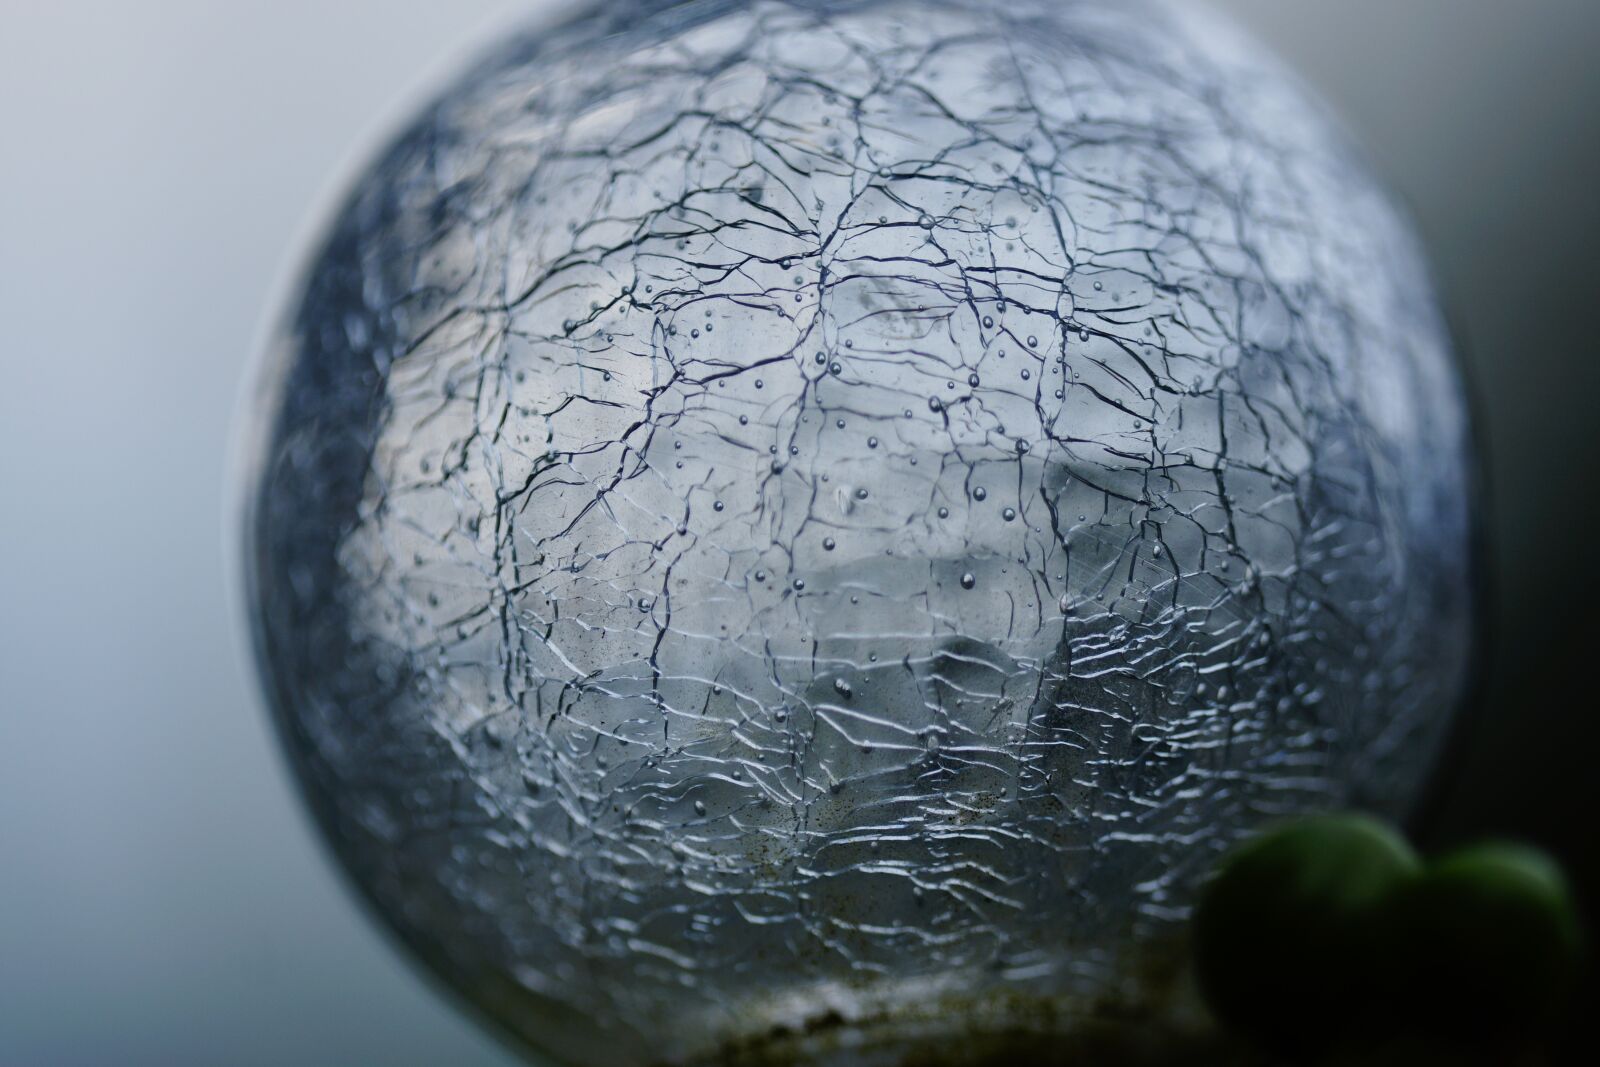 150mm F2.8 sample photo. Ball, glass, cold photography